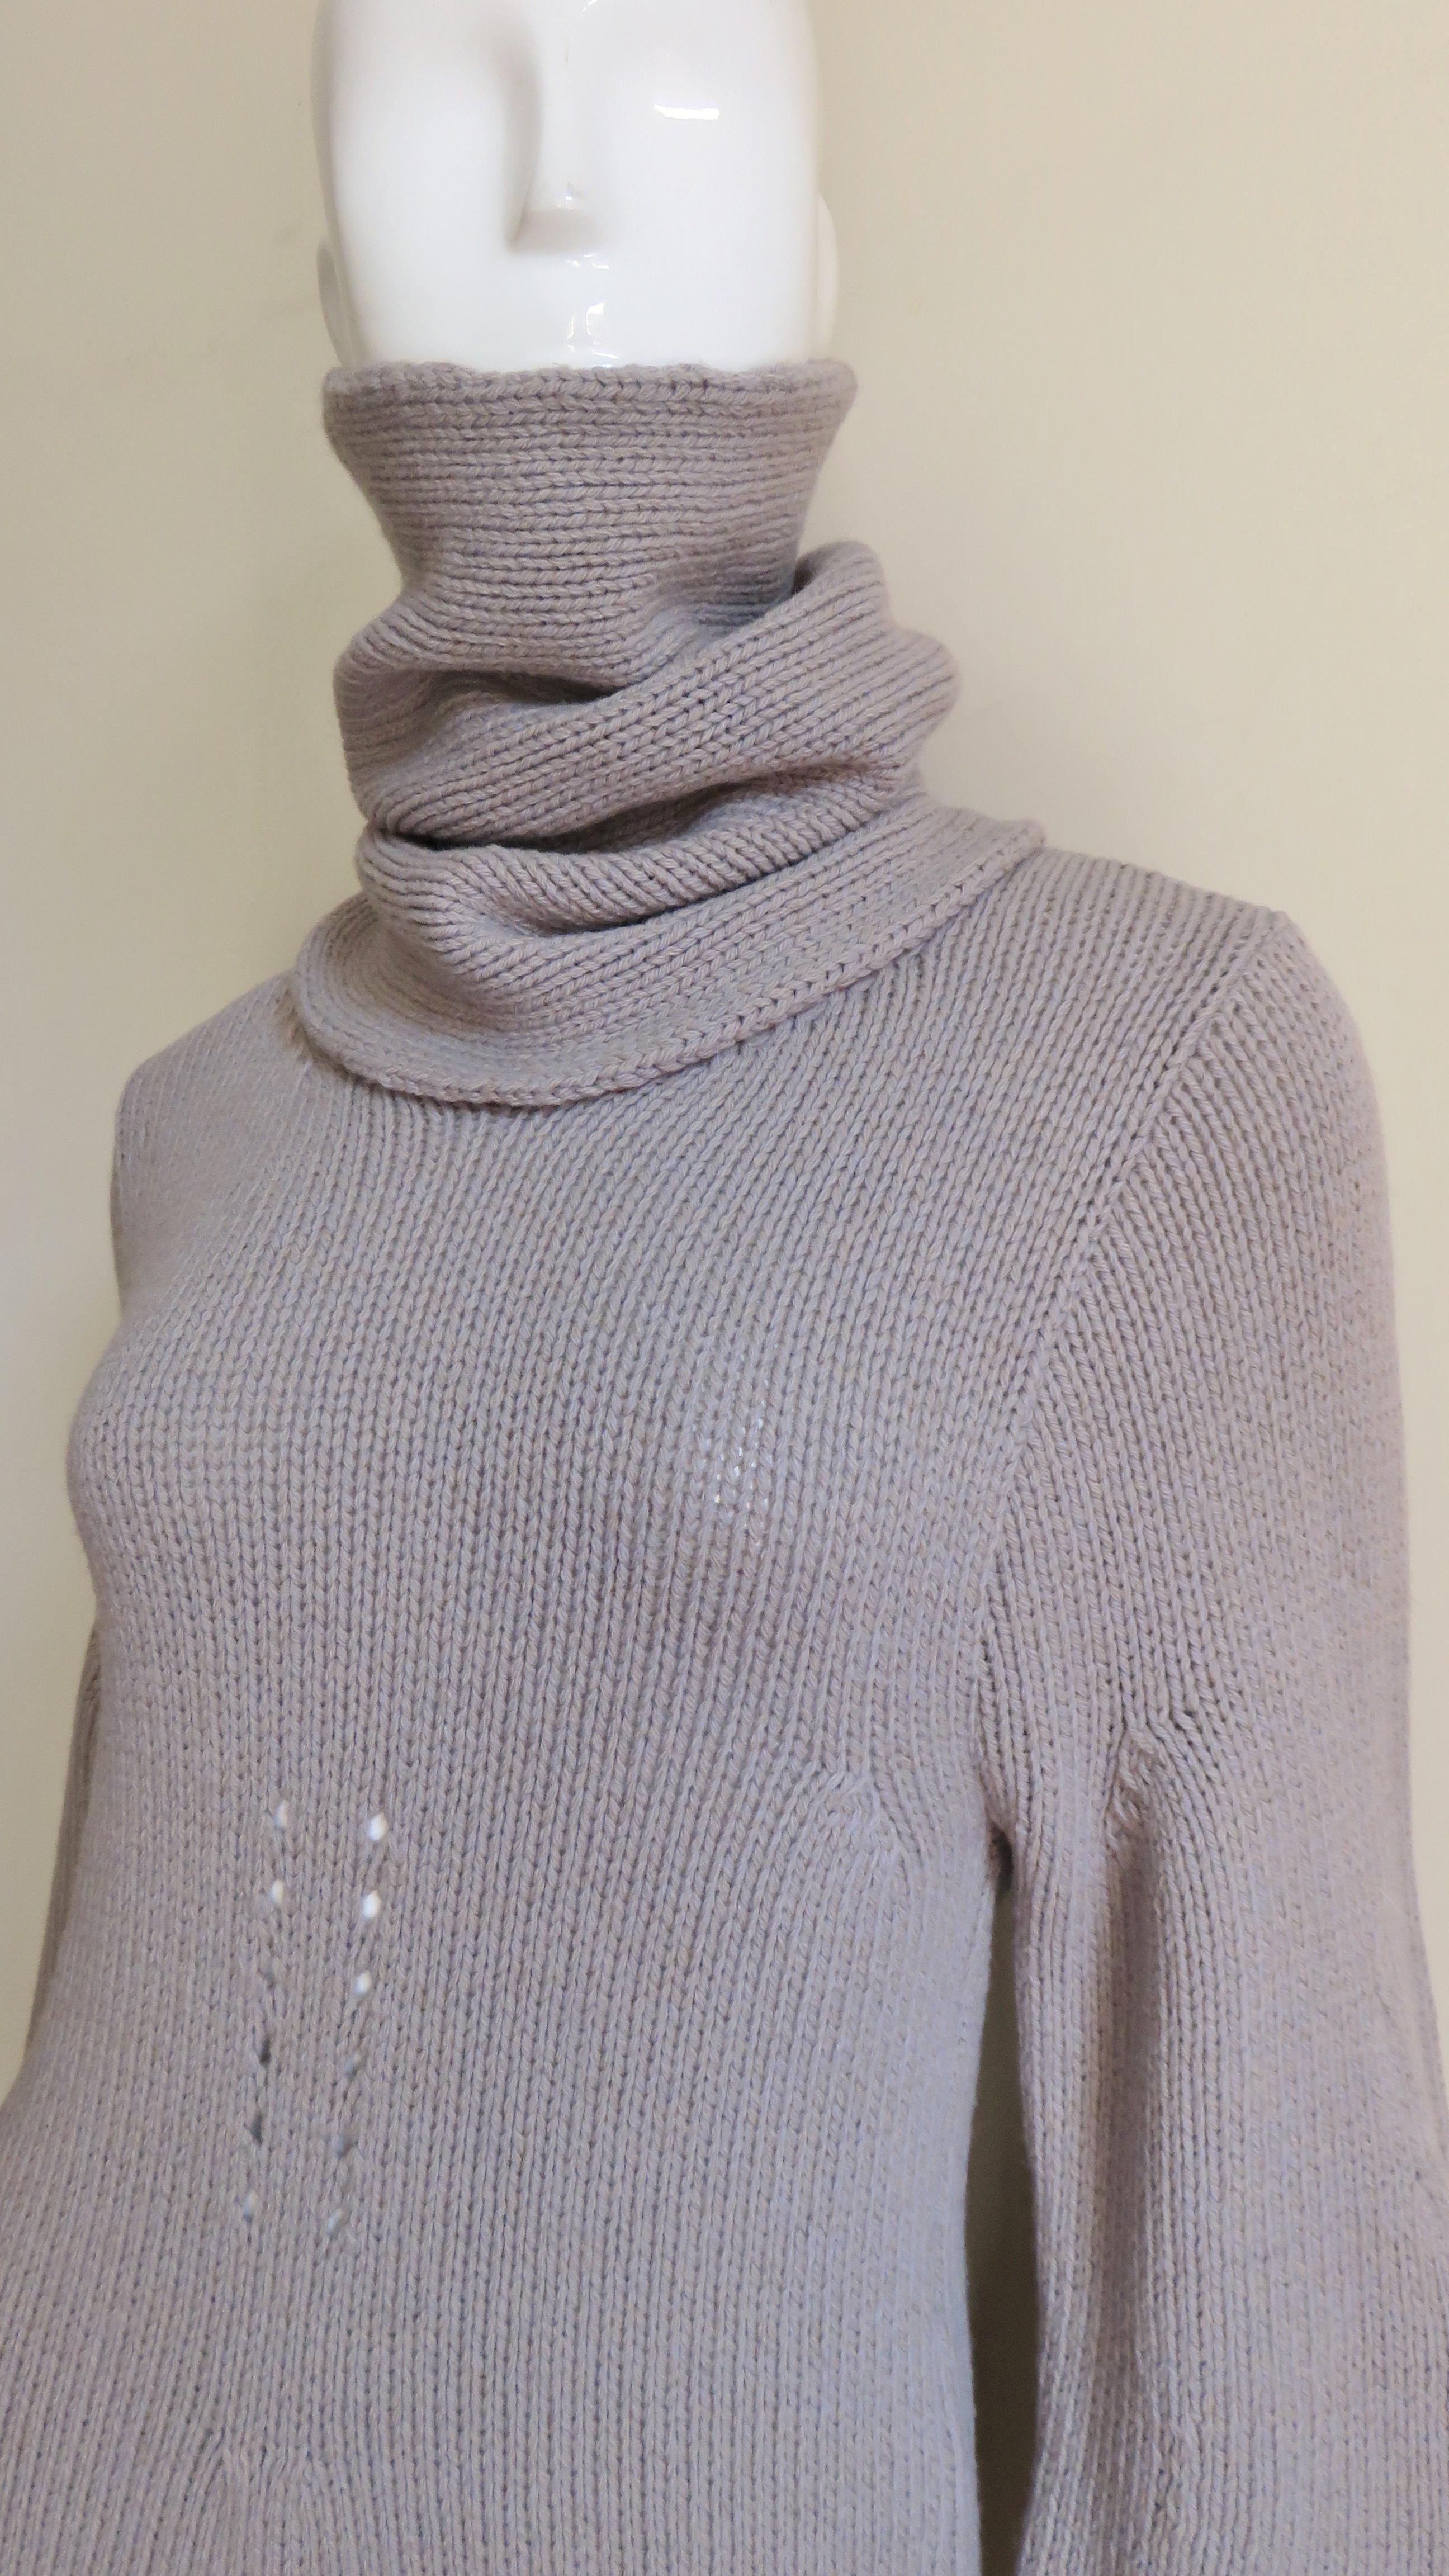 Ann Demeulemeester New Oversize Sweater and Neck Tube  In Excellent Condition For Sale In Water Mill, NY